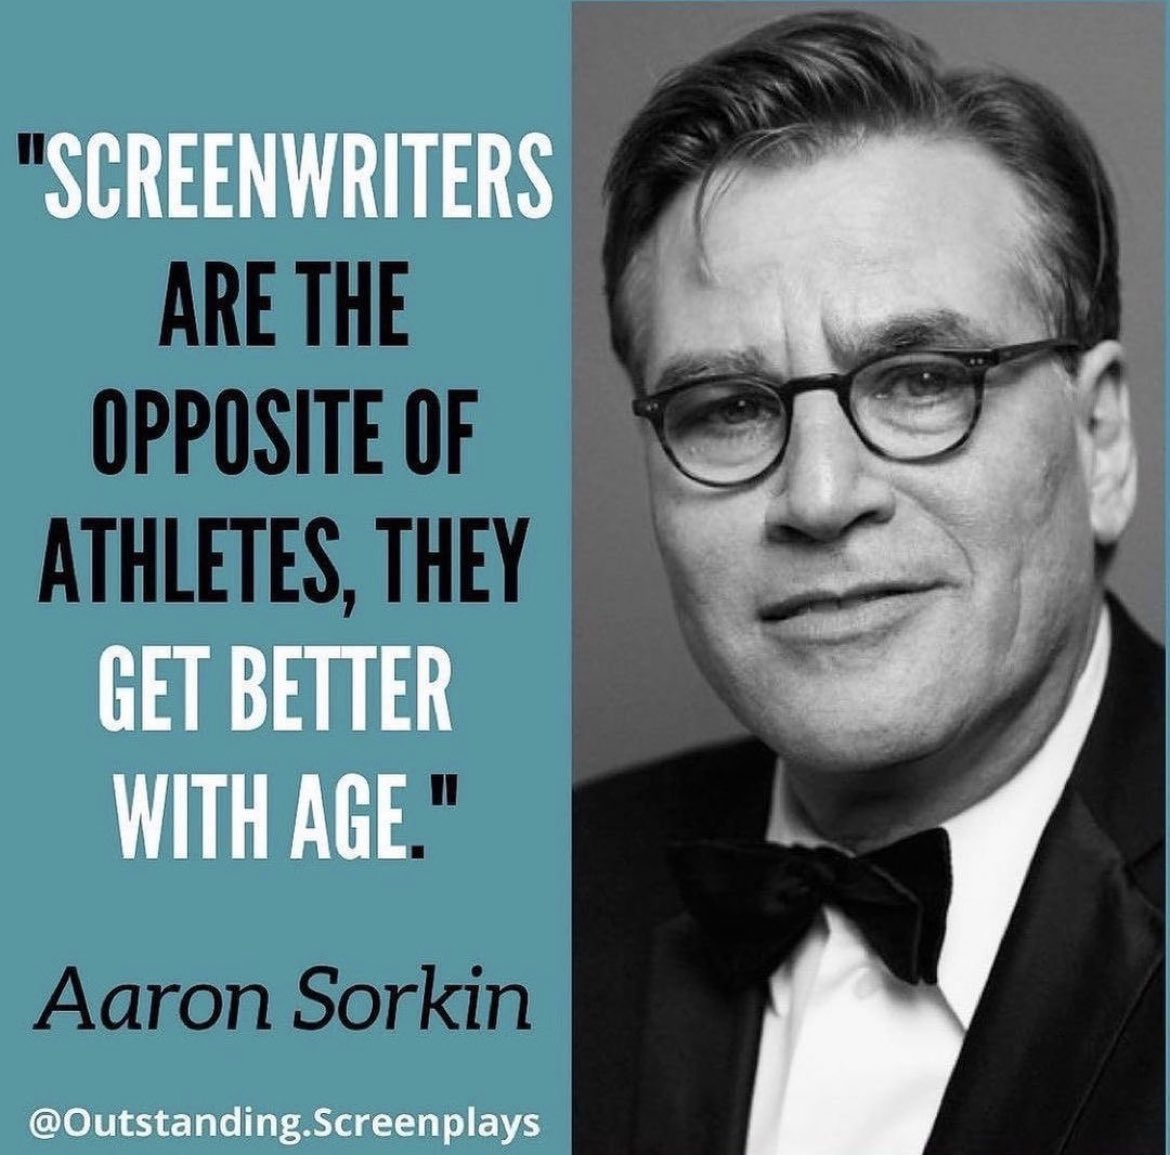 Good Morning 🌞 Just Remember Creatives You Are Only Getting Better in Your Craft!
#Keepwriting #Creatives #WritingCommmunity  #Aaronsorkin #Screenwriters